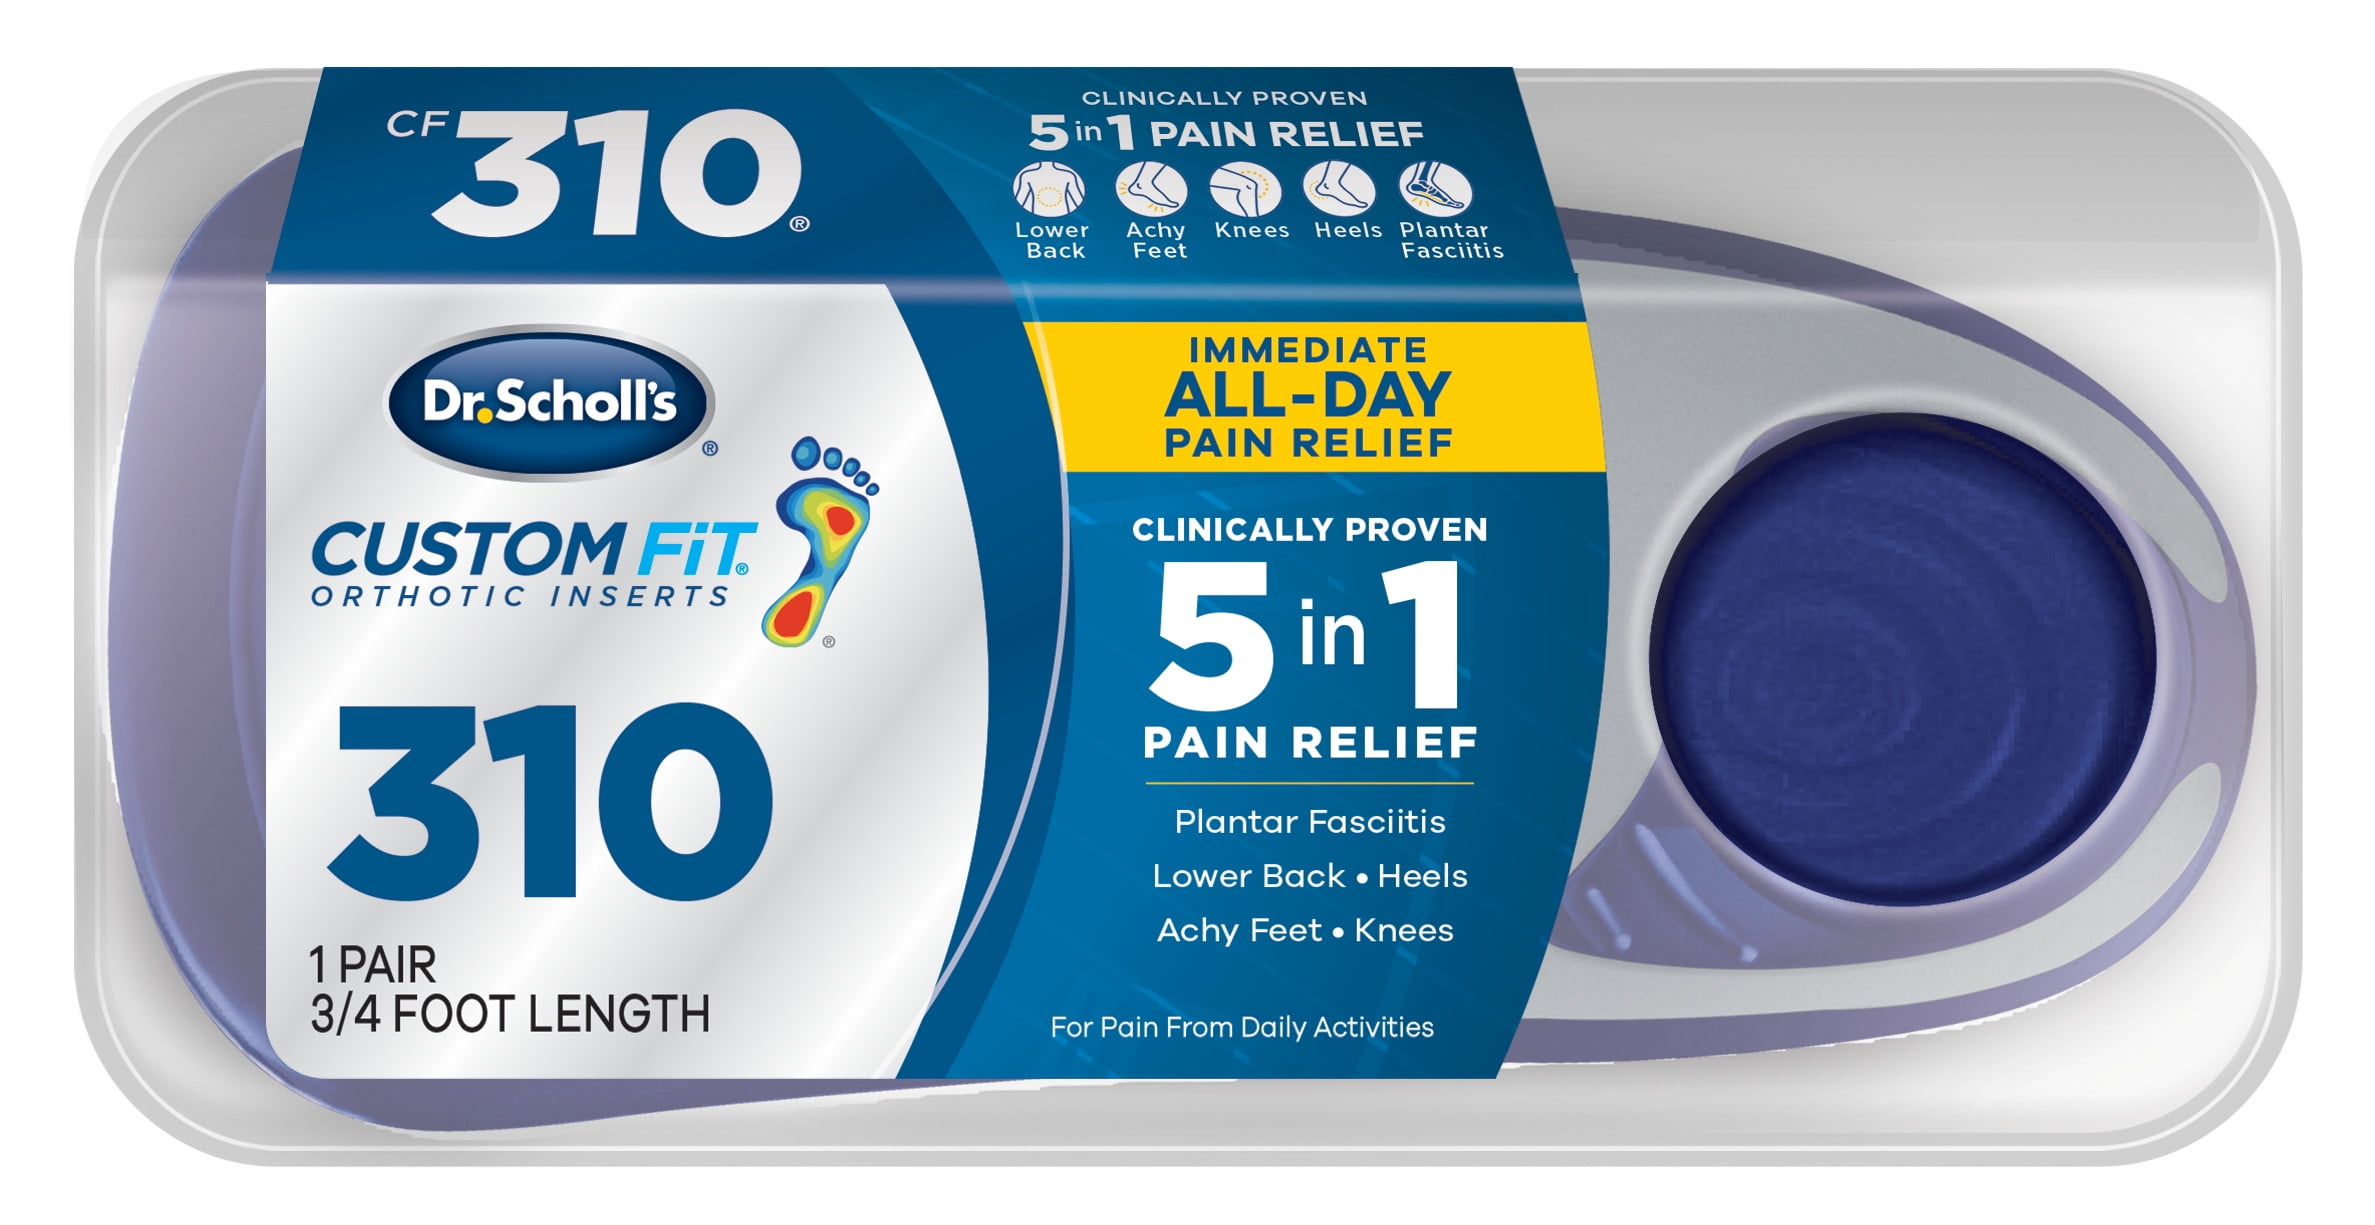 Dr Scholls Custom Fit CF 310 Orthotic Insole Shoe Inserts for Foot Knee and Lower Back Relief 1 Pair